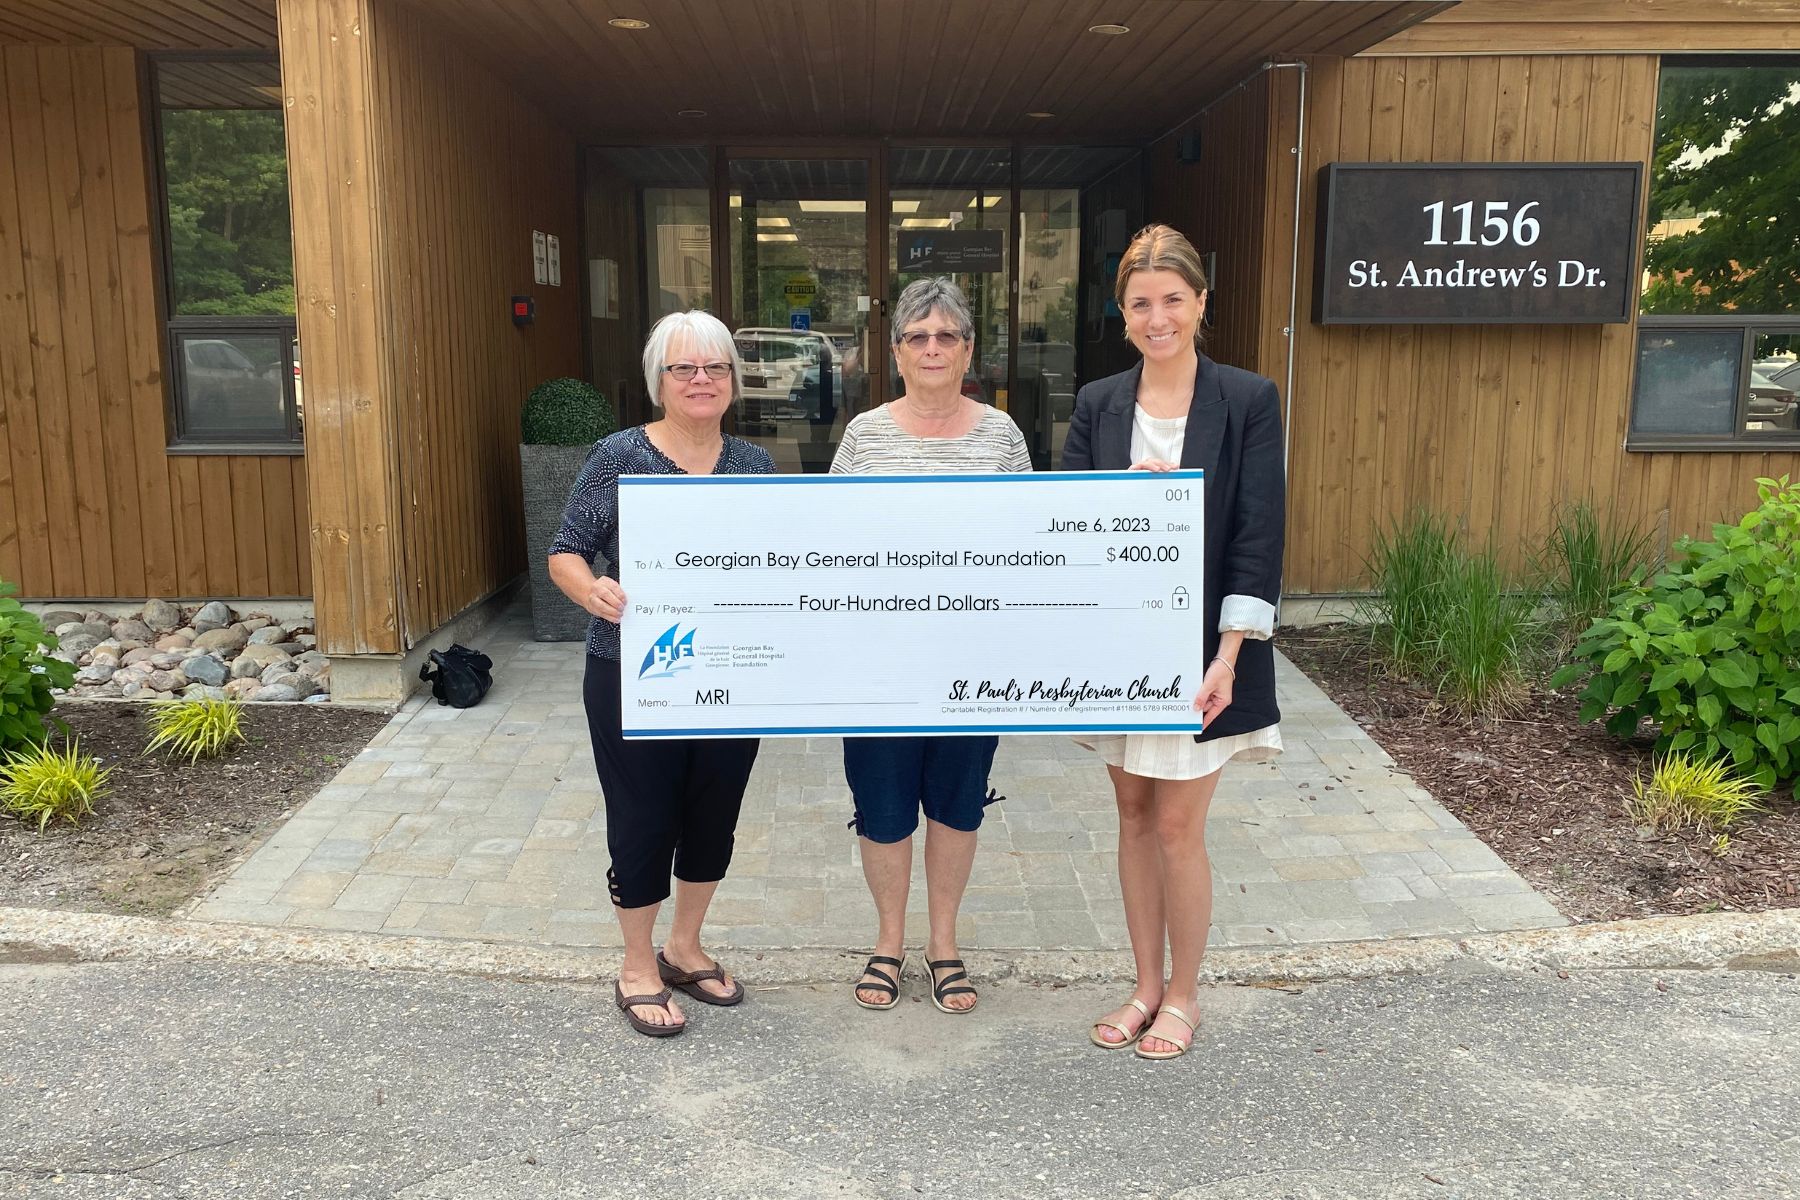 Three women hold a giant cheque for $400 towards the MRI fund from St Paul's Presbyterian Church